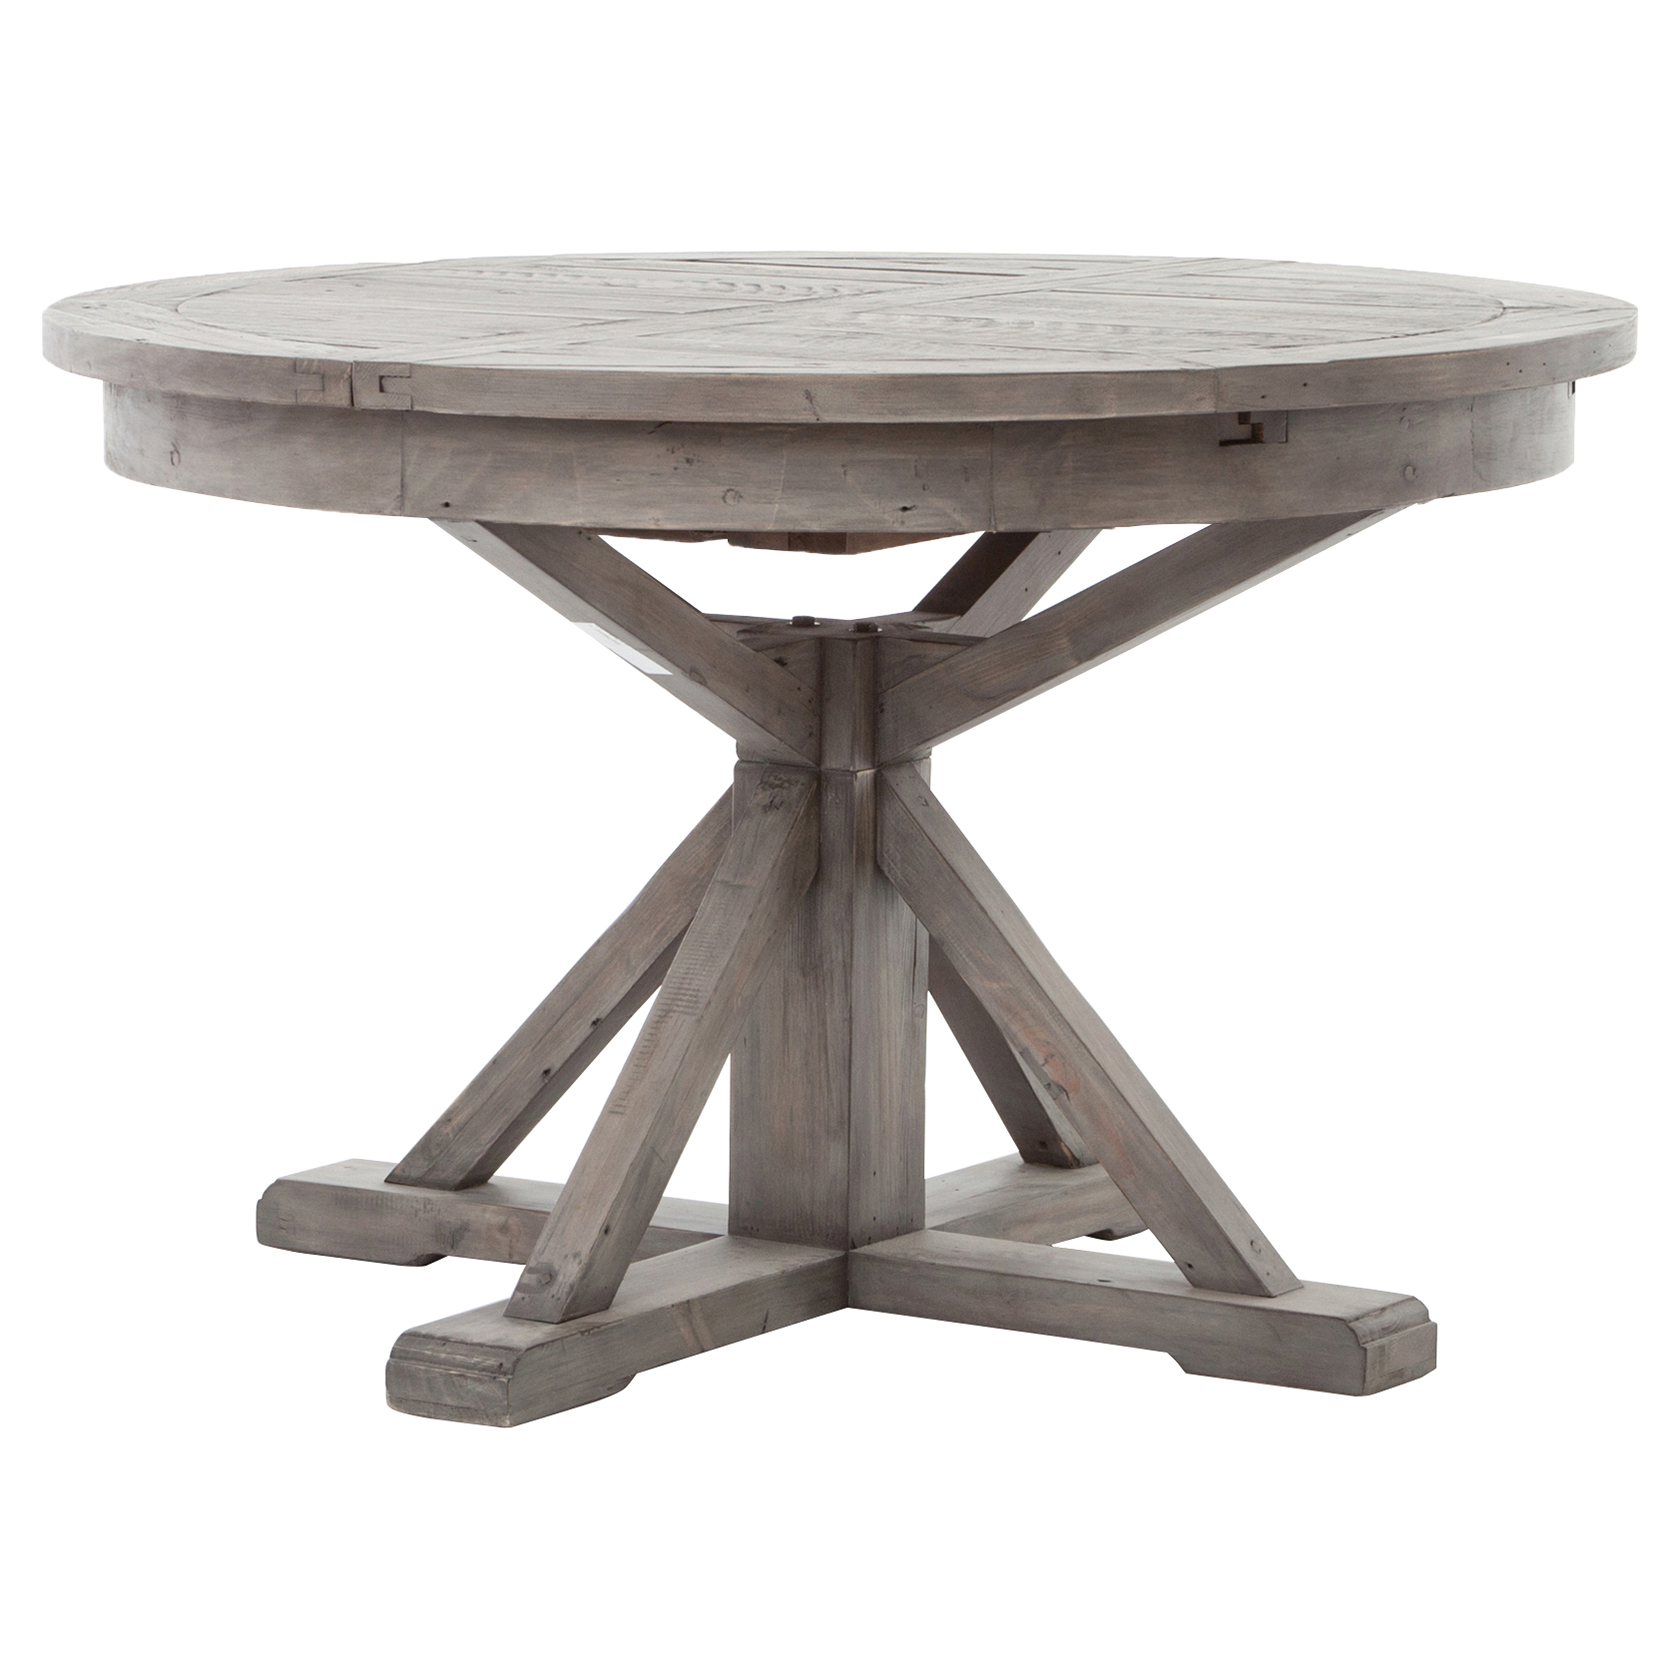 Chabert French Reclaimed Wood, Chabert French Reclaimed Wood Round Extendable Dining Table